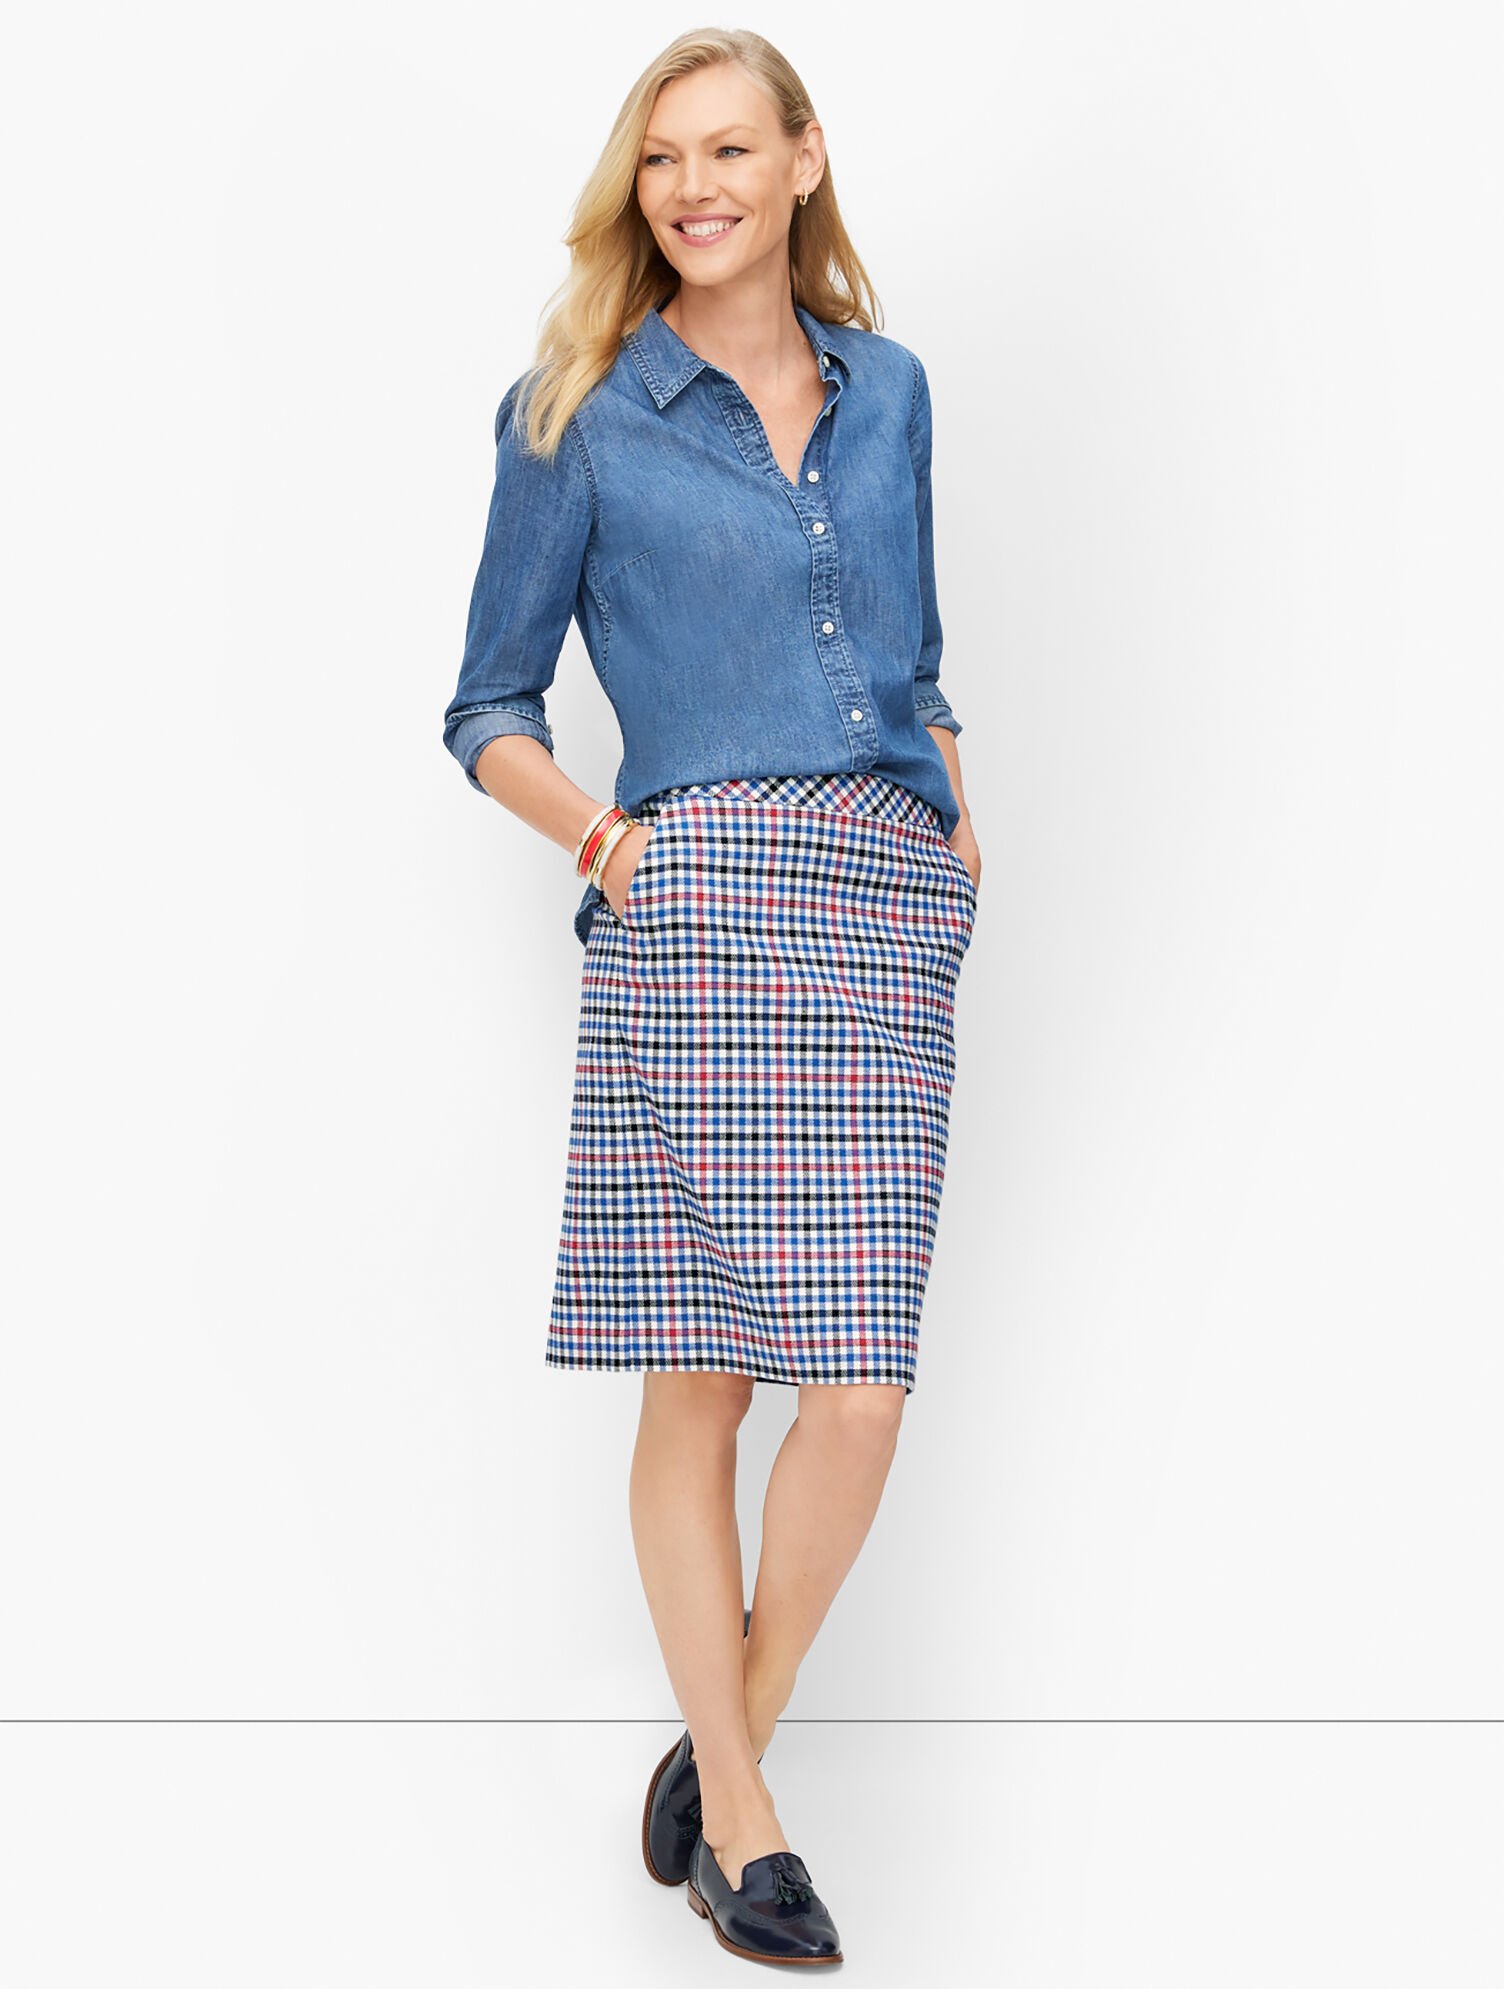 Confetti-Plaid A-Line Skirt - Talbots - Crafted from a soft polyester  blend, in a fun confetti plaid, this irresistible state…